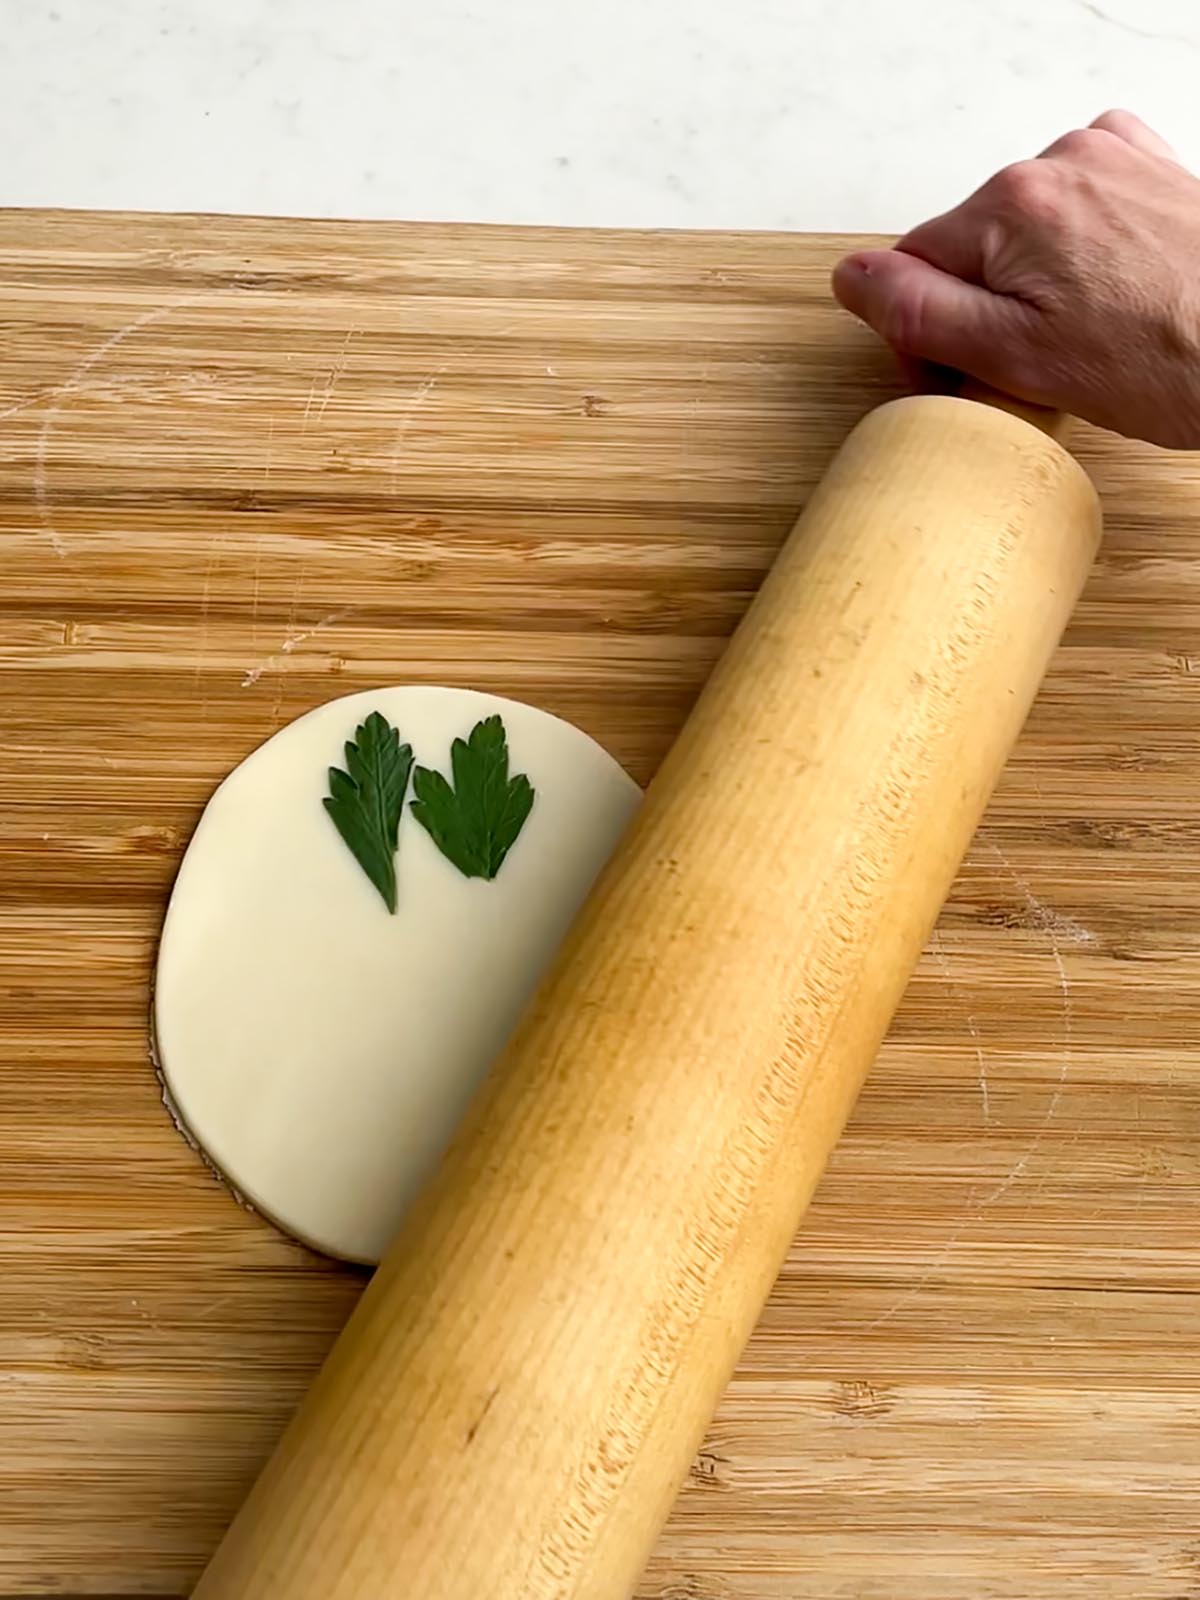 rolling pin over a pie dough round with herbs